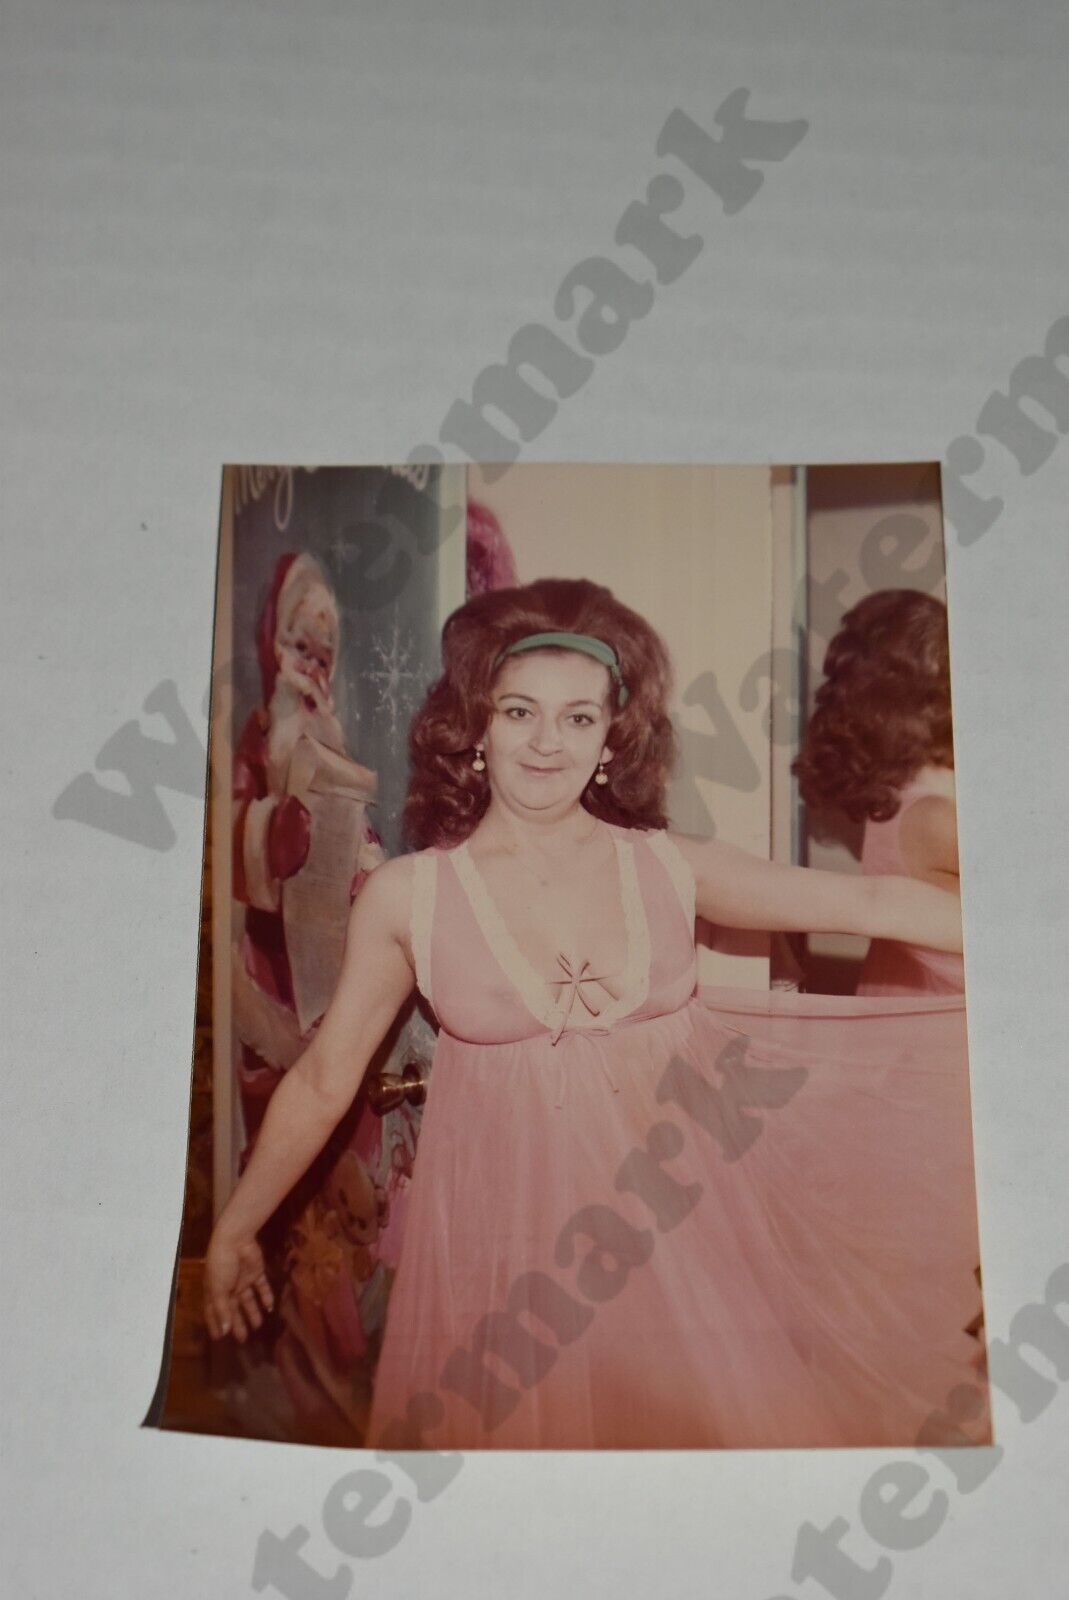 busty mature woman in pink lingerie VINTAGE PHOTOGRAPH  Hb